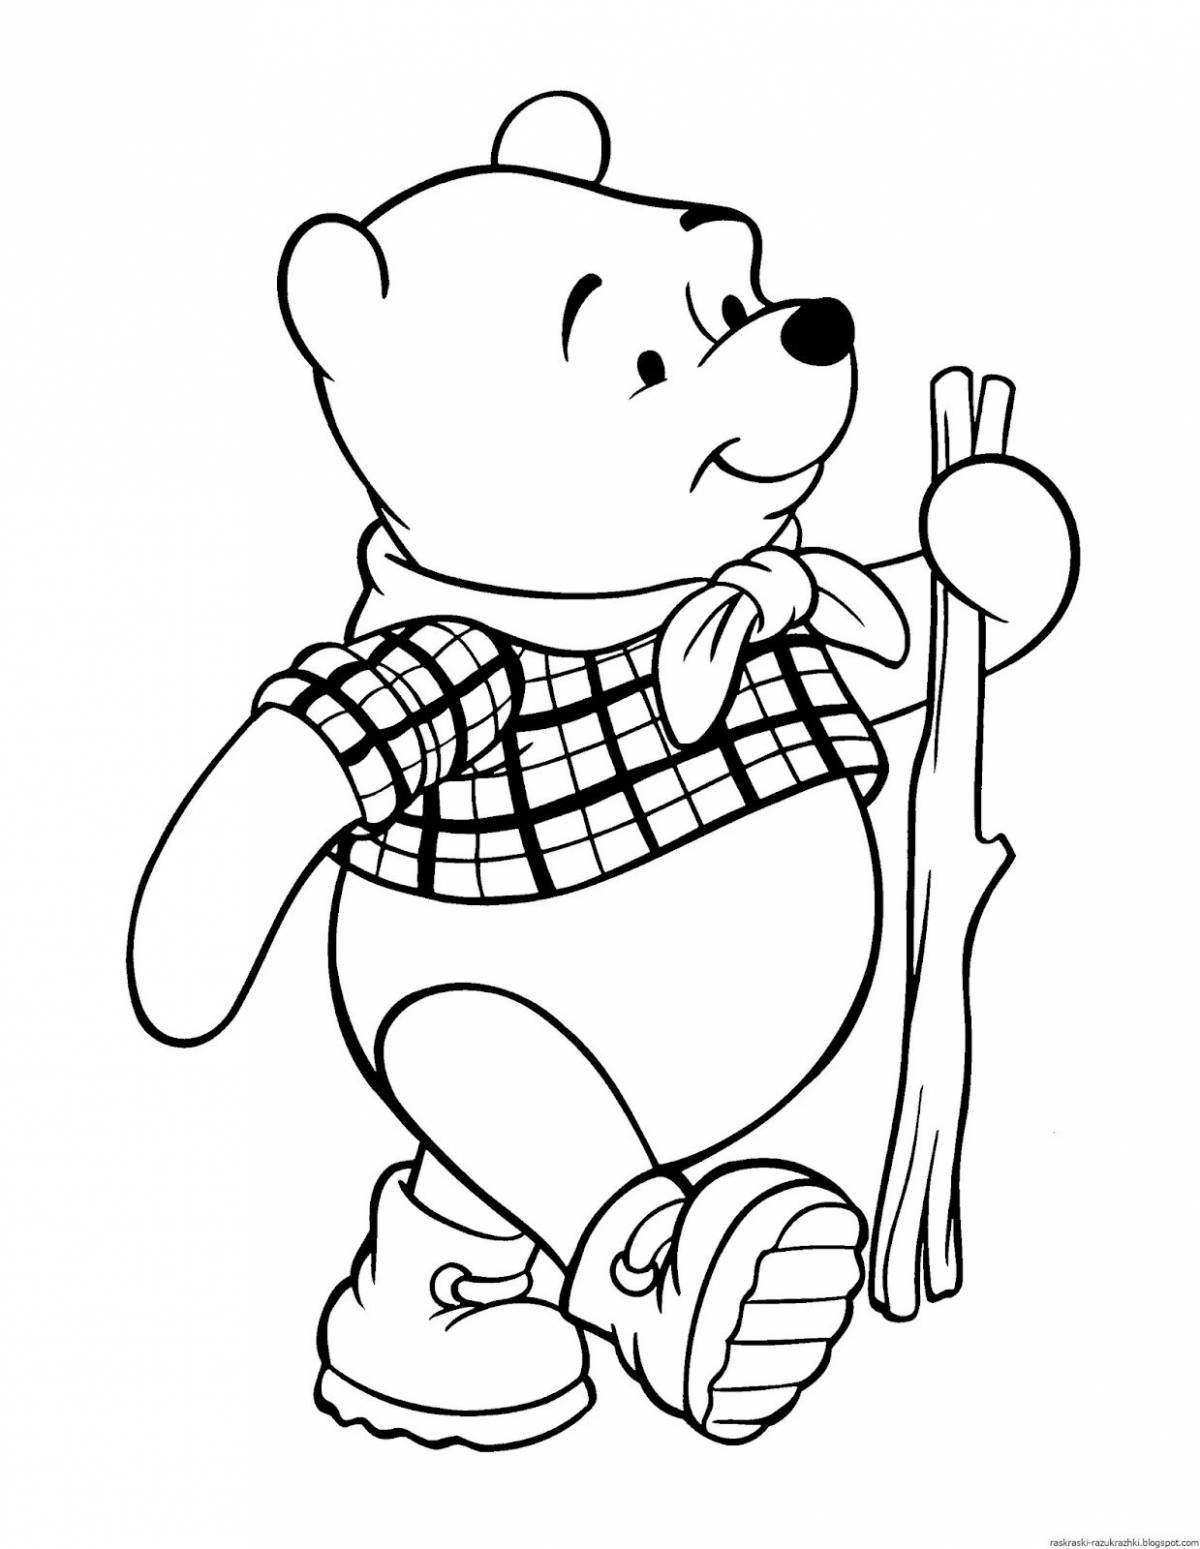 Winnie the pooh coloring book